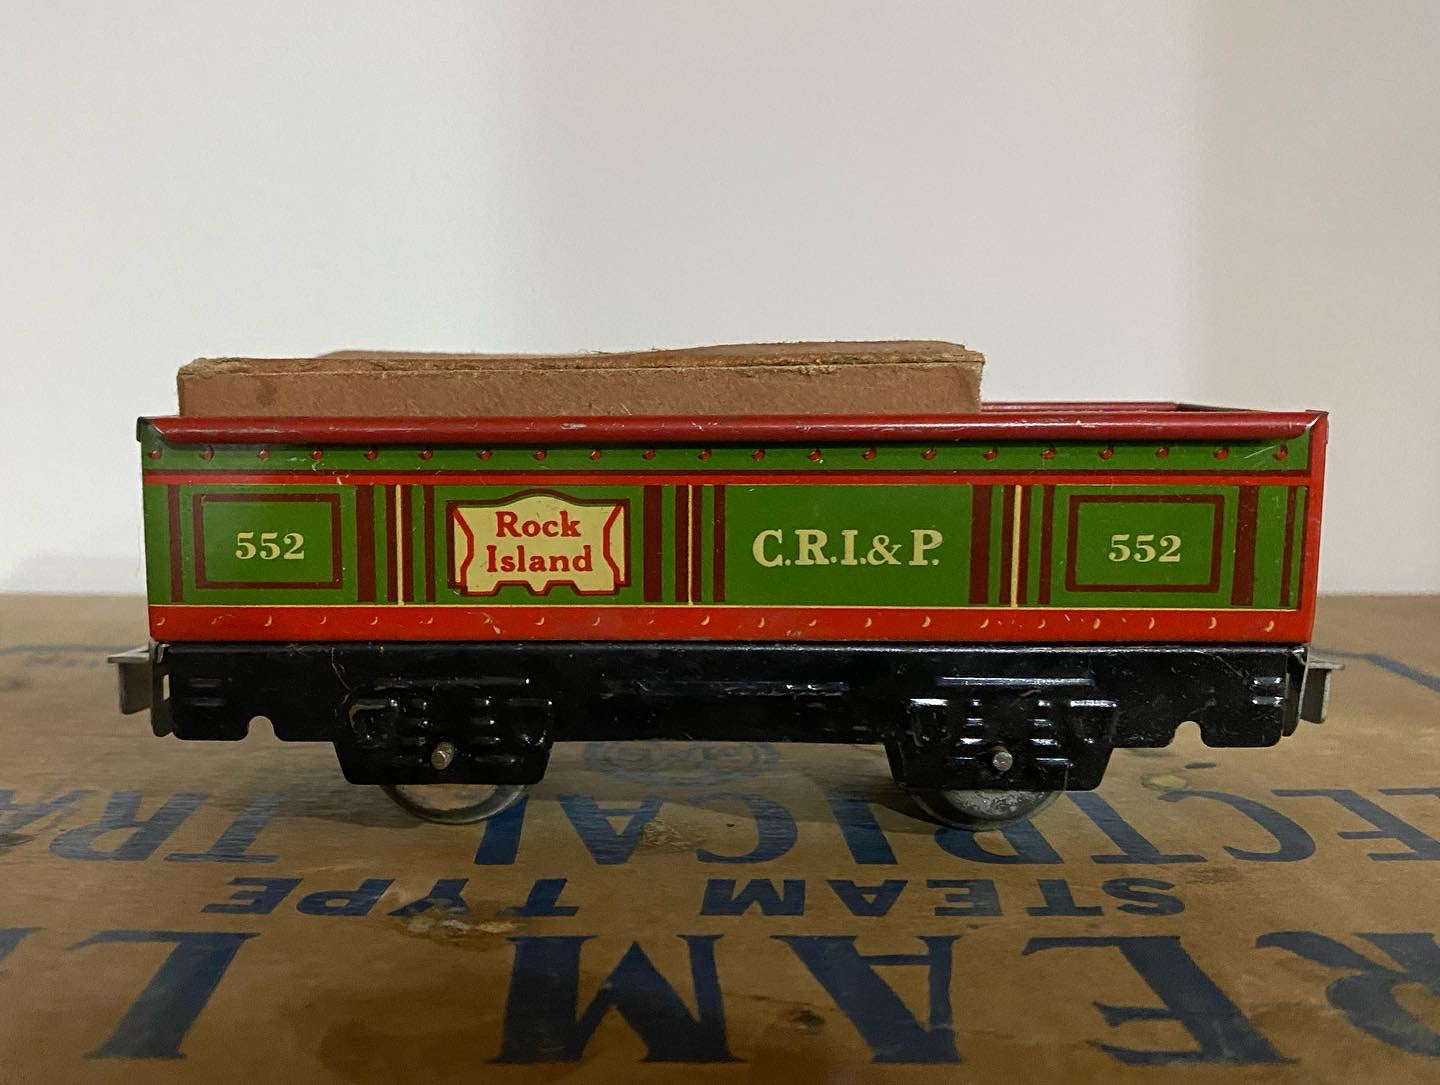 Vintage 1940s - 1950s  Marx Train set #3987 with box. Manufactured by the Louis Marx Co.